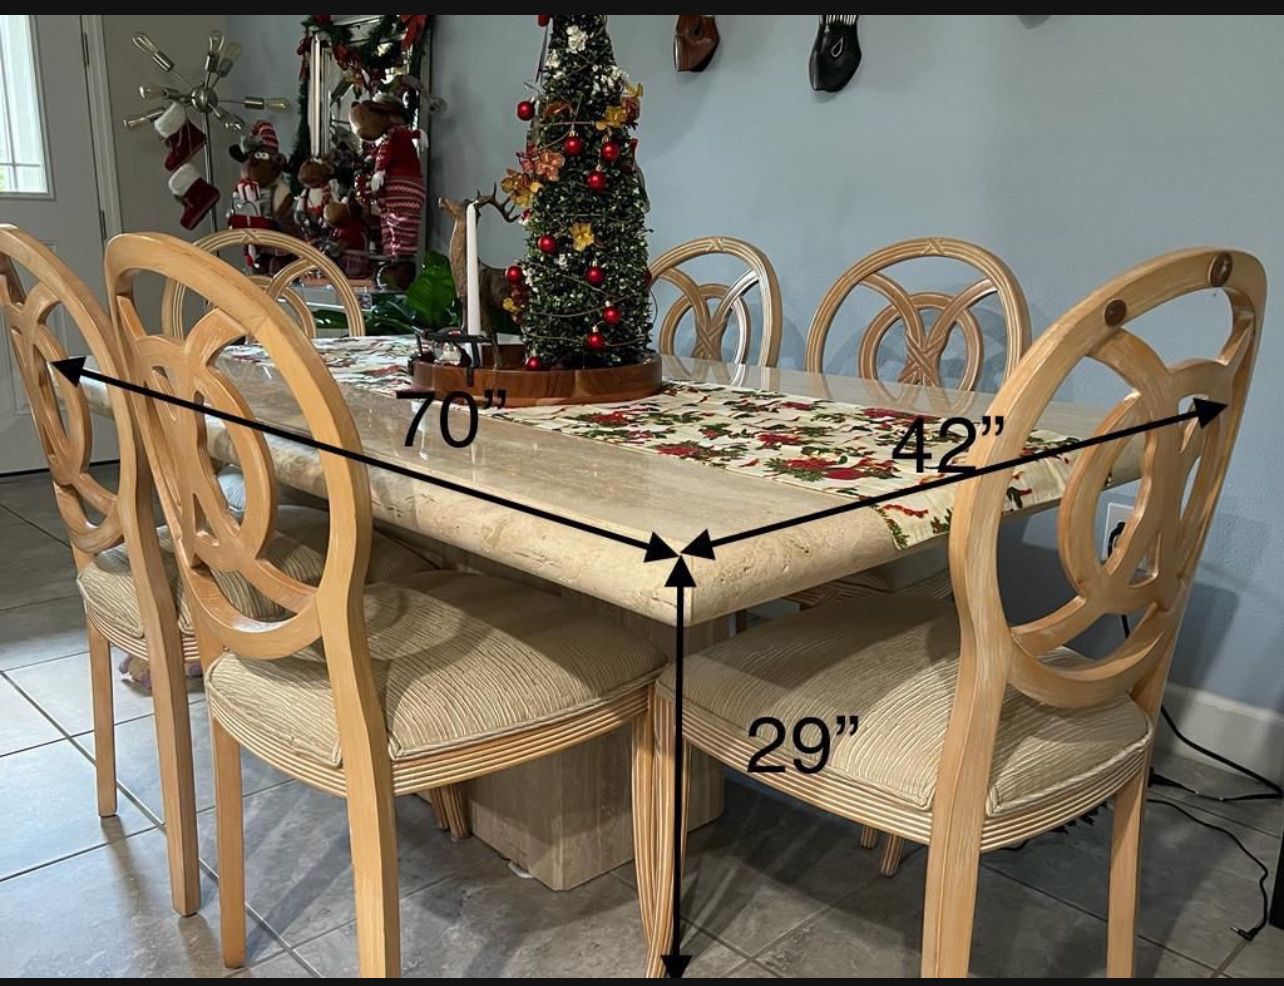 REAL TRAVERTINE MARBLE DINNING TABLE W 6 CHAIRS made in ITALY in EXCELLENT CONDITION - delivery